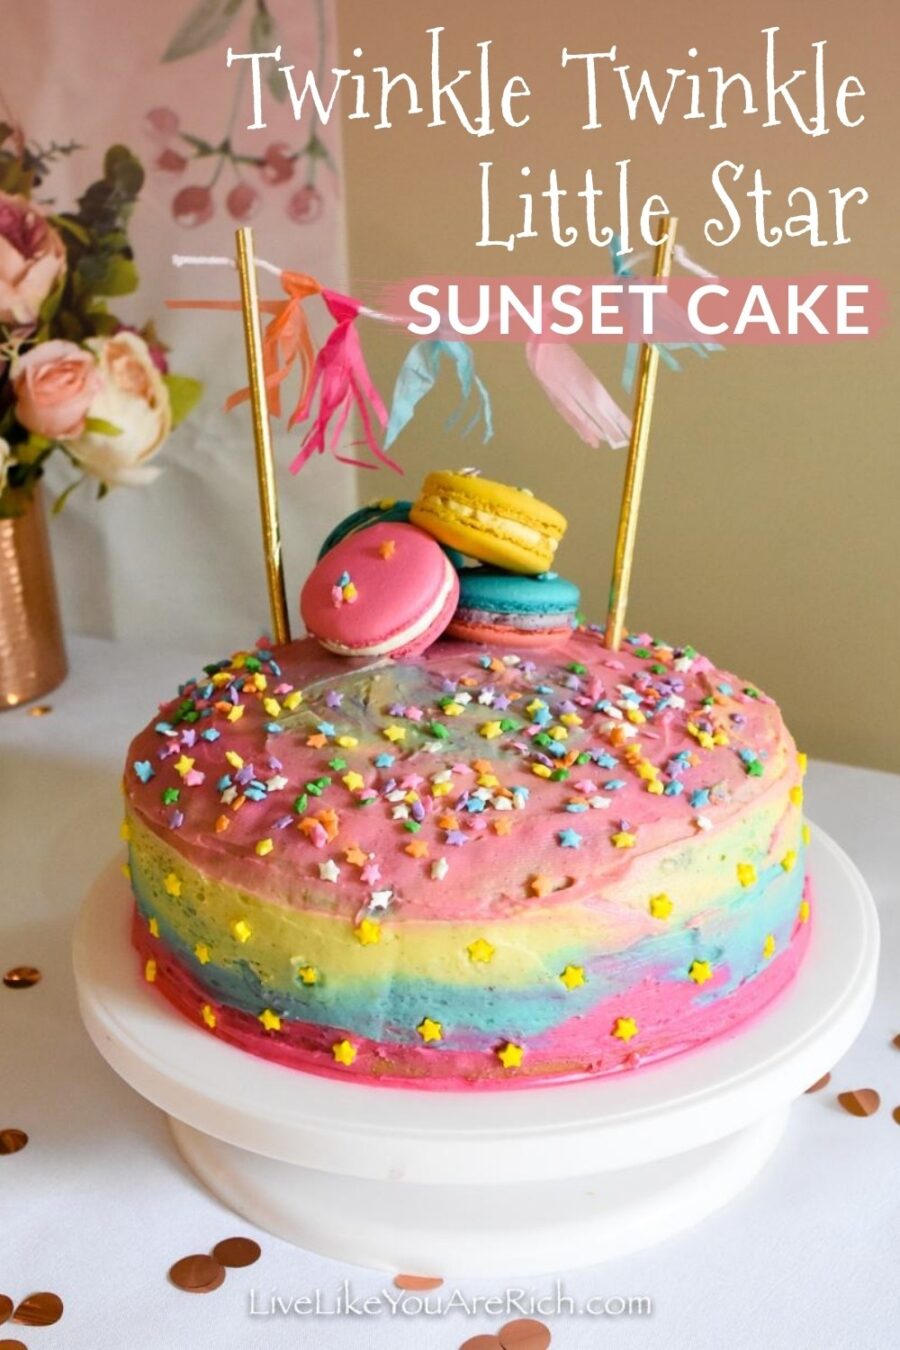 I was planning a Twinkle Twinkle Little Star Party for my one year old's first birthday. My decor called for color. So, I decided that since you can sometimes see a few bright stars at sunset, I would make two Twinkle Twinkle Little Star "Sunset Cake". They were very simple to make and turned out quite cute.